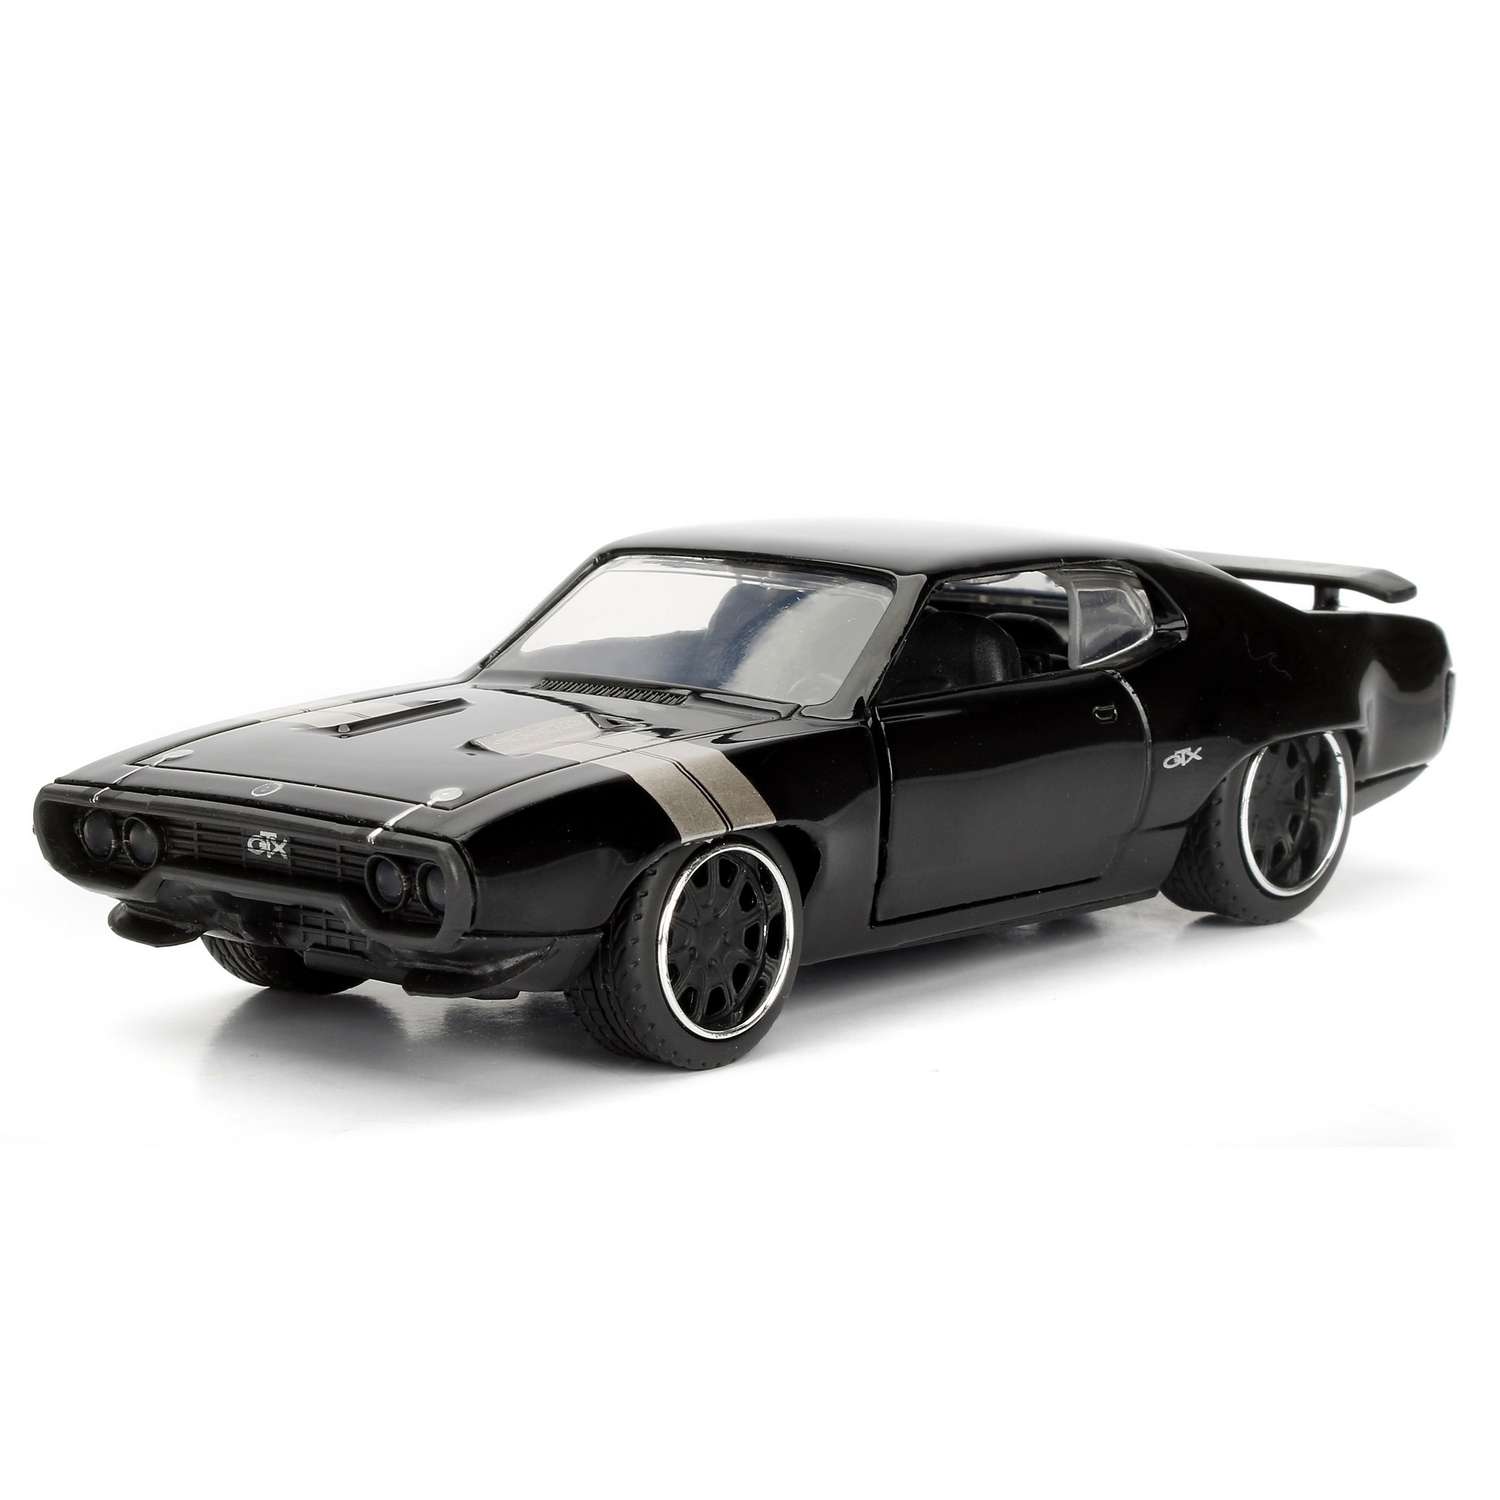 Машинка Fast and Furious Die-cast Plymouth GTX 1:32 металл 24037 - фото 1